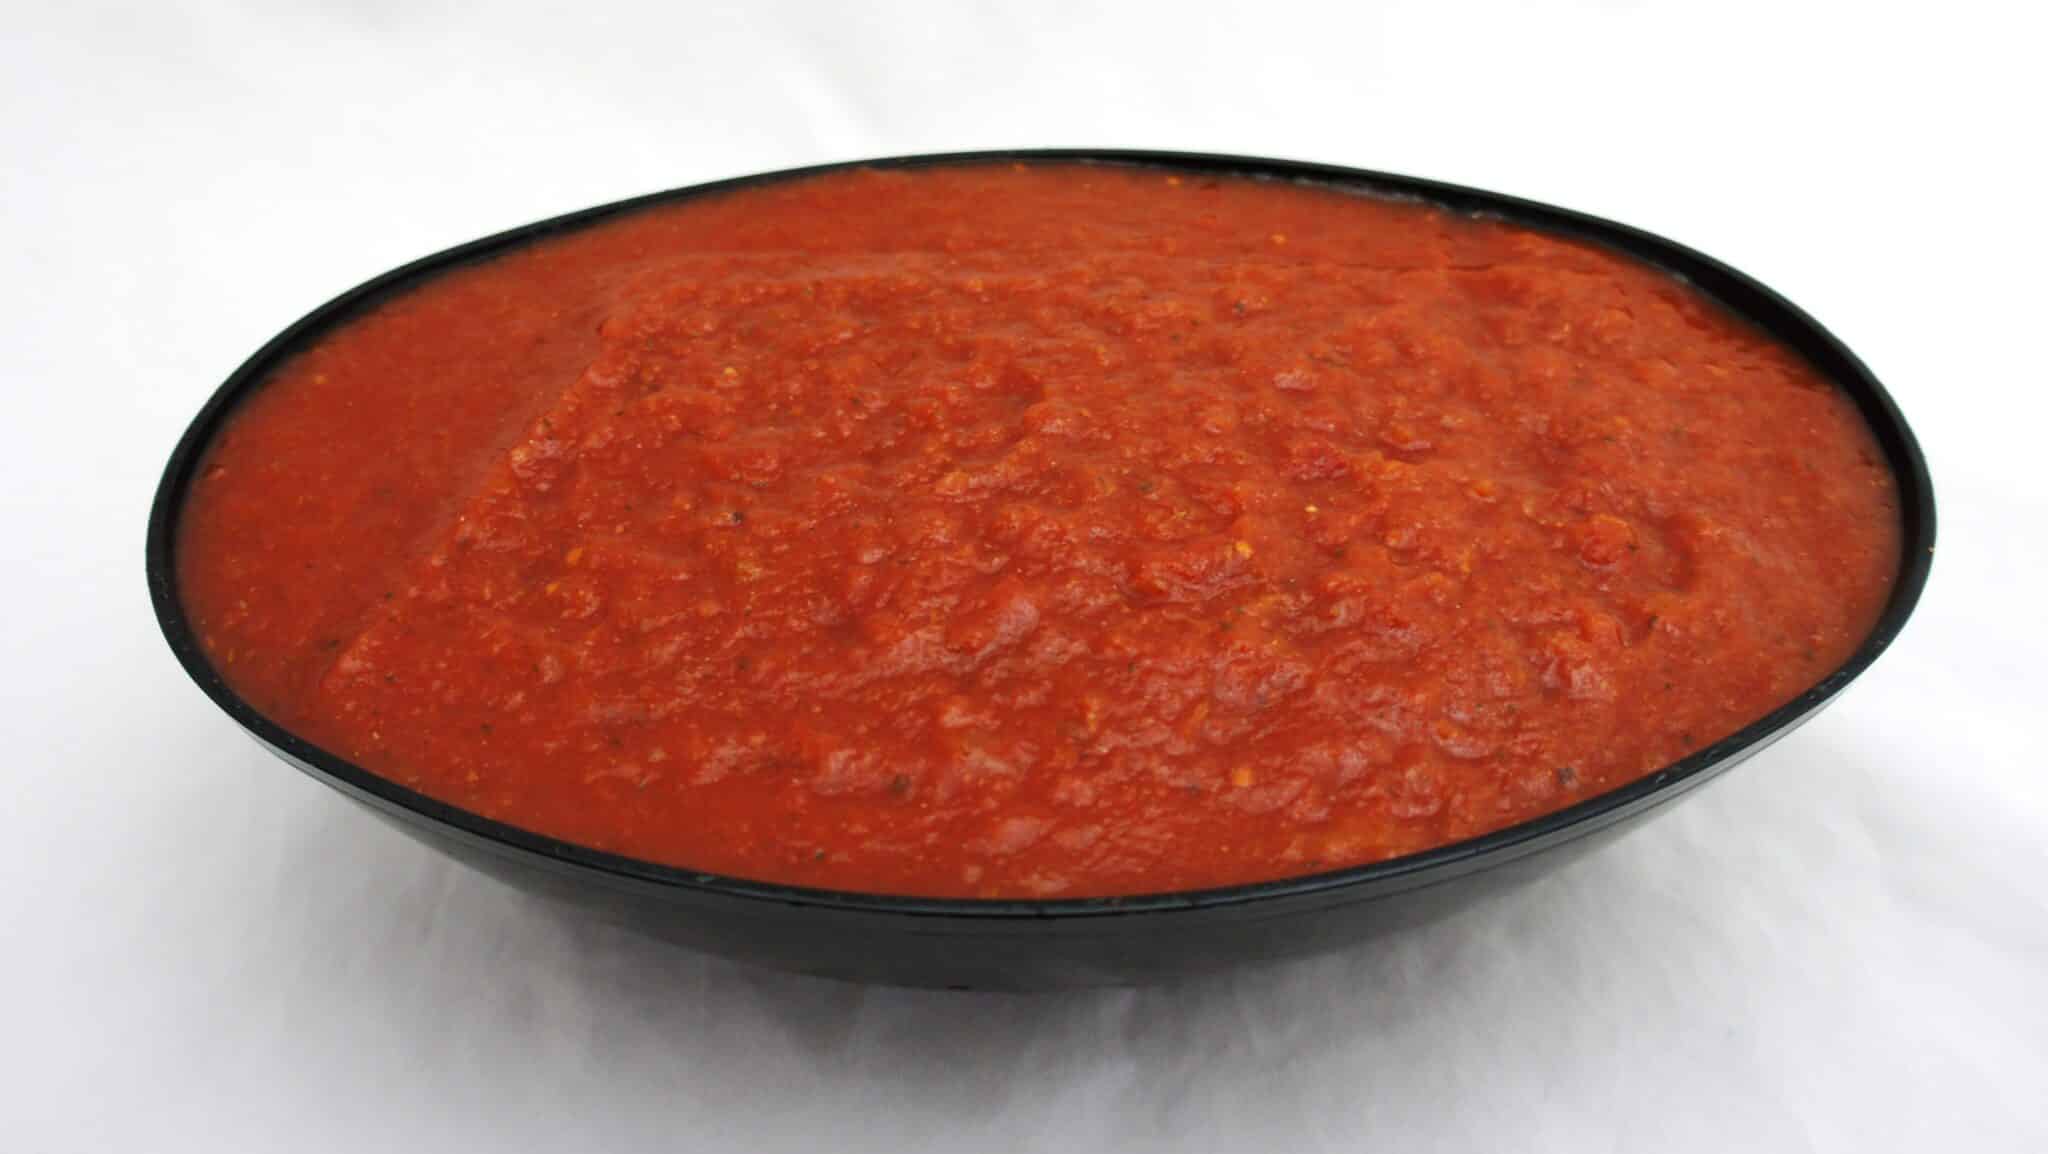 Tomato sauce in a bowl on a white surface with organic diced tomatoes.